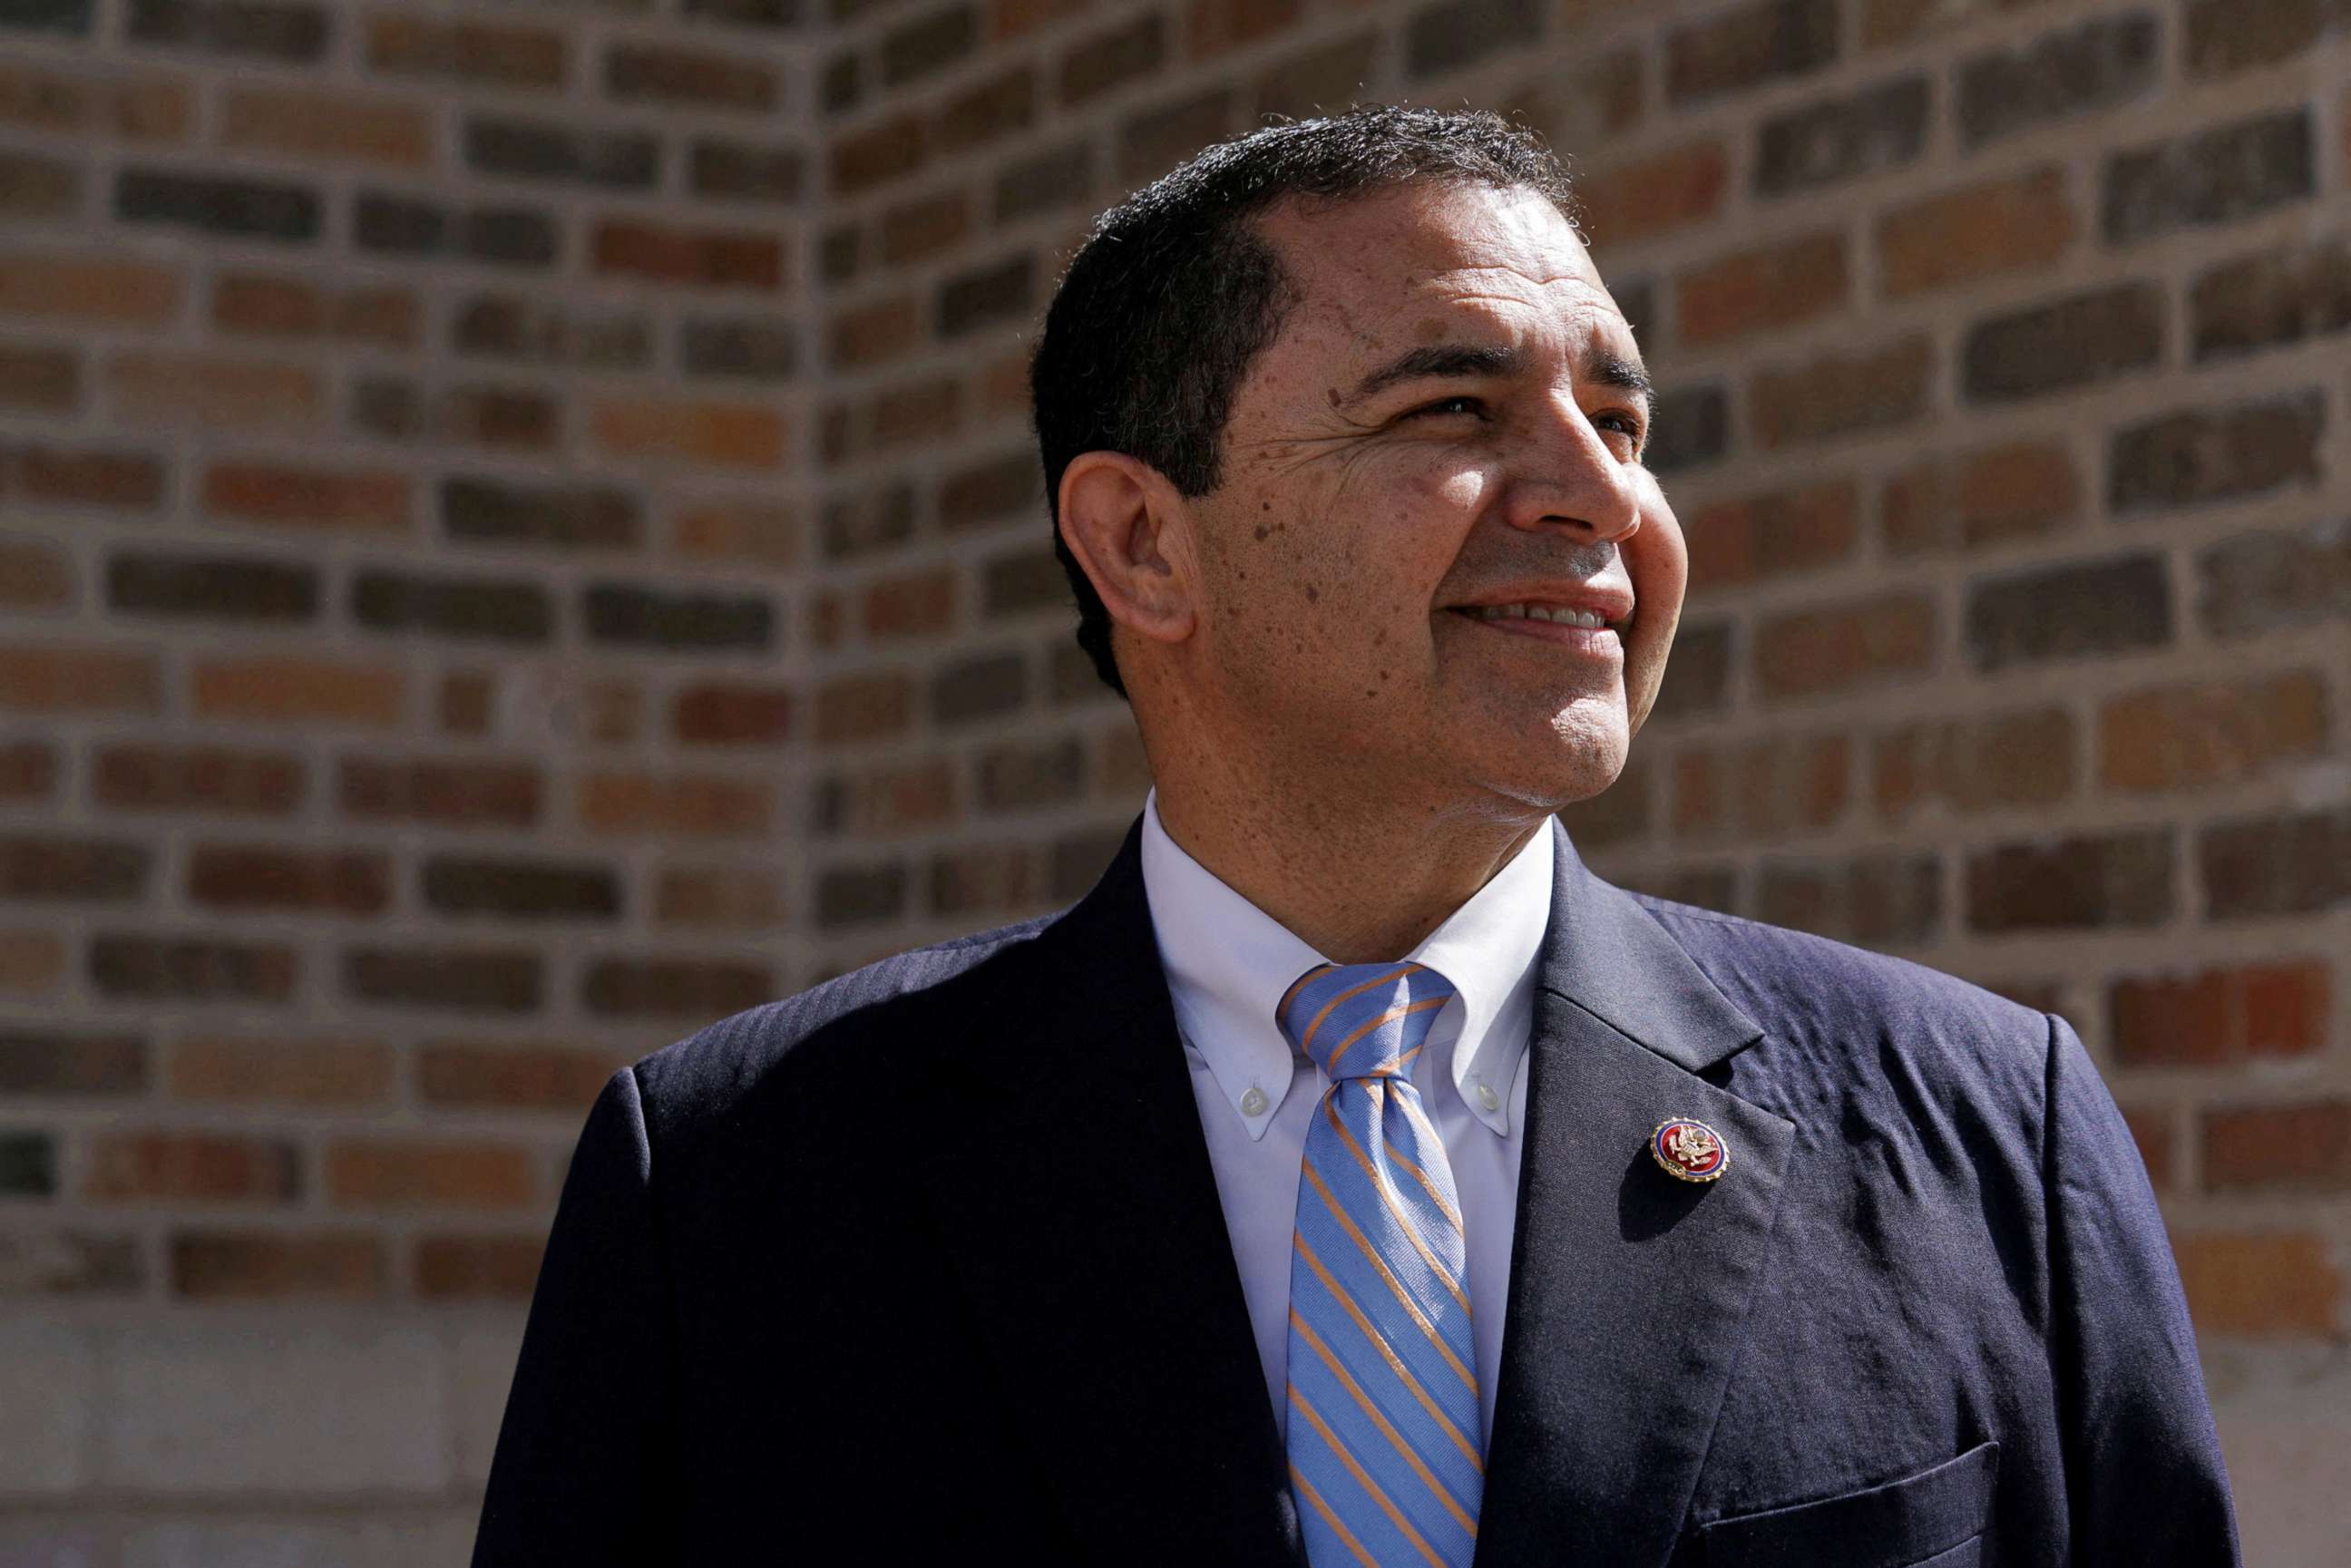 PHOTO: Democratic U.S. Rep. Henry Cuellar of Texas, running for reelection to the U.S. House of Representatives in the 2022 U.S. midterm elections, poses for a photo in Laredo, Texas, Oct. 9, 2019.